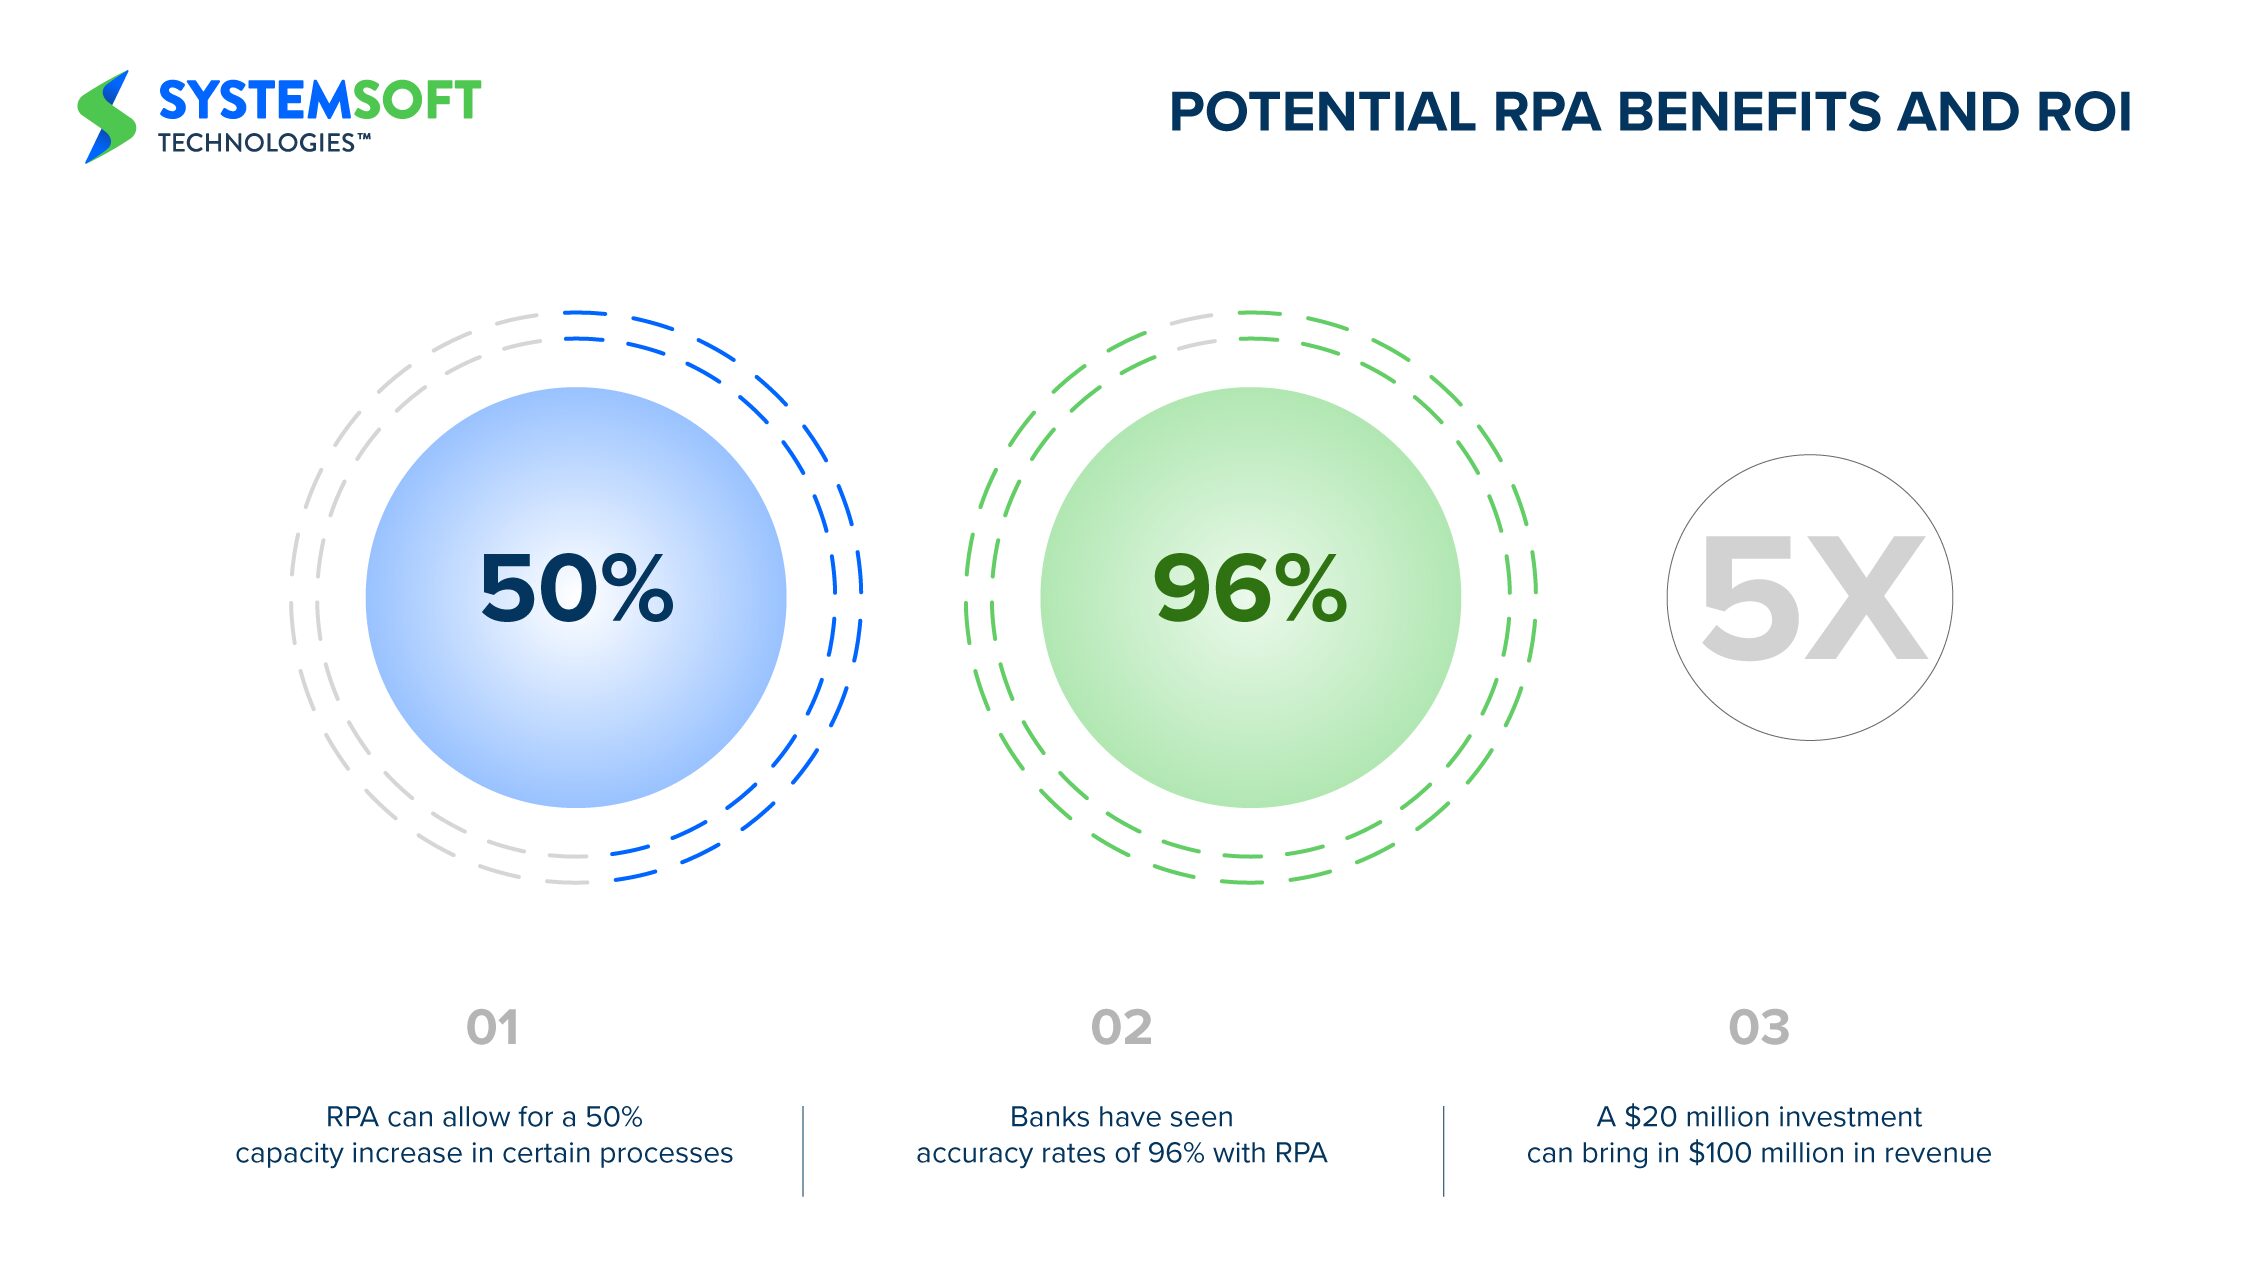 Image shows the potential benefits of RPA in commercial banking and some stats on ROI